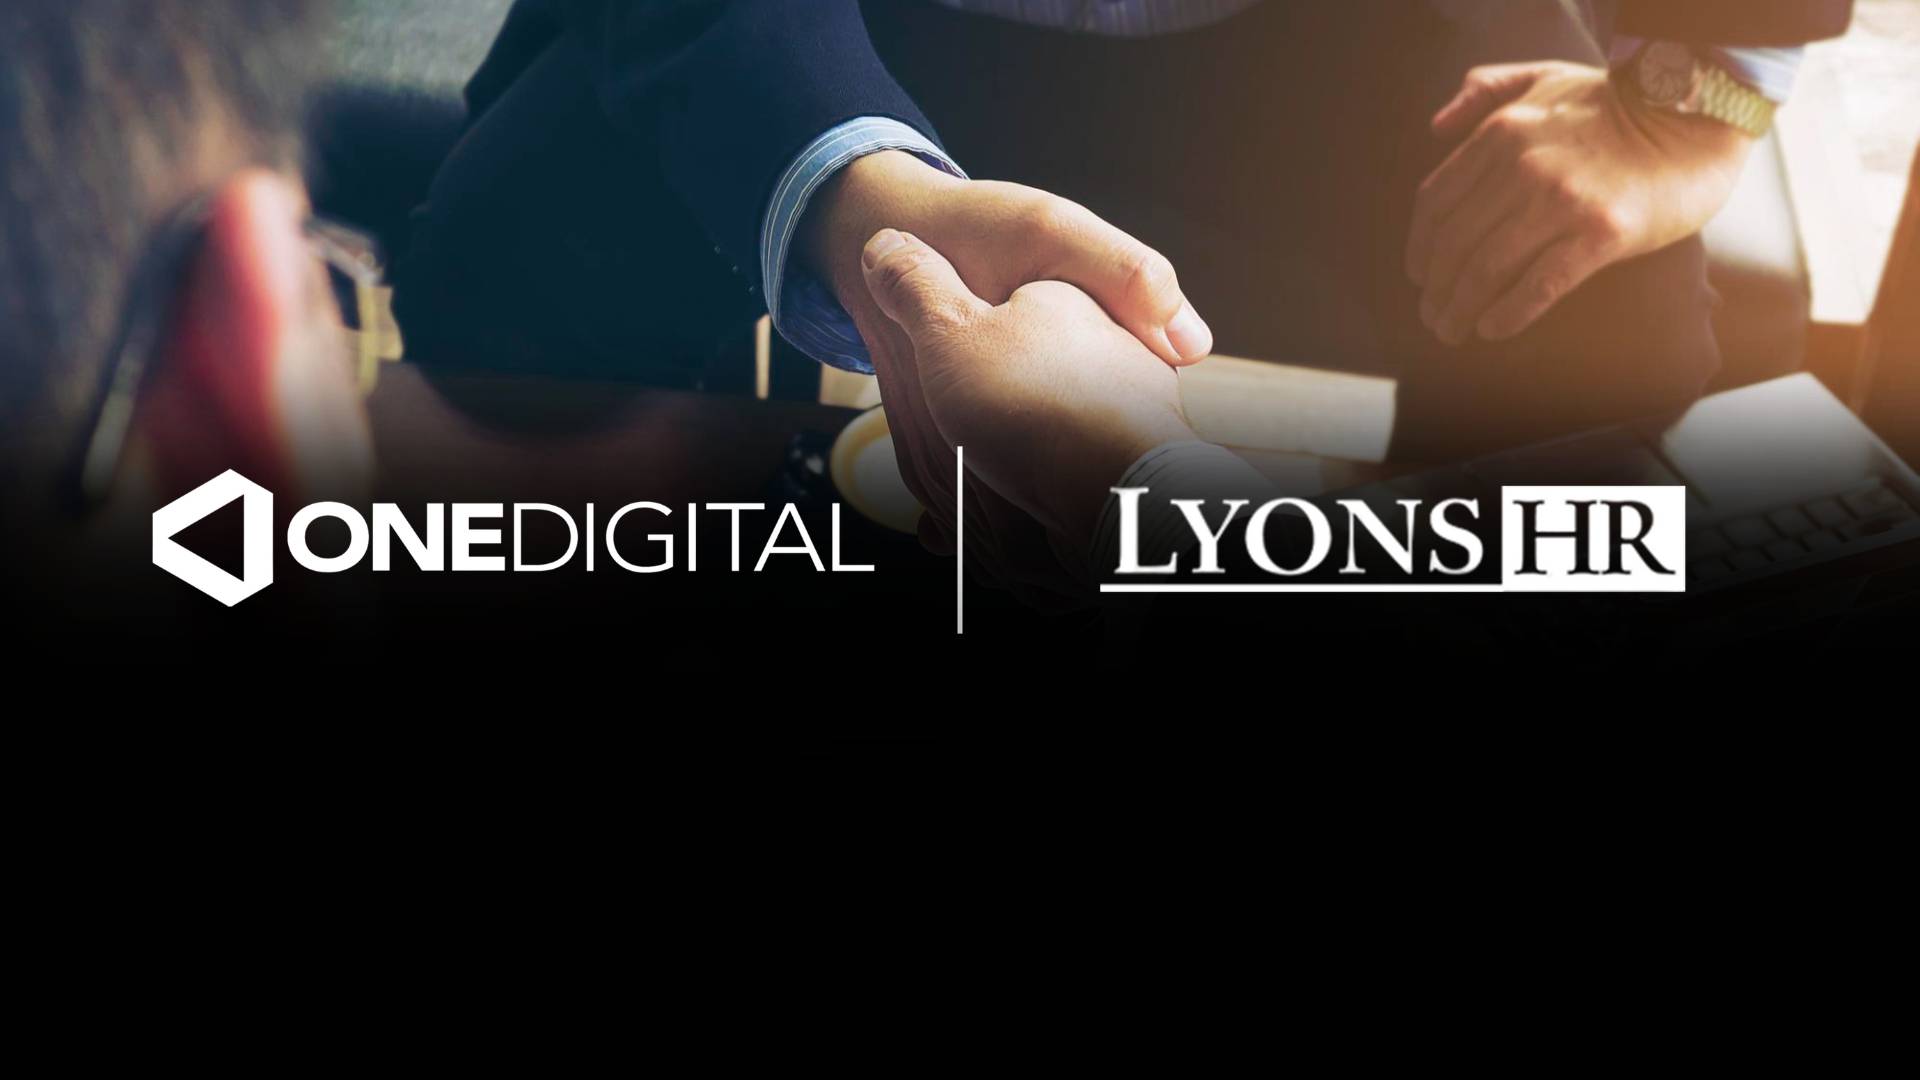 OneDigital Acquires Lyons HR: Expanding PEO Solutions in the Southeast Region